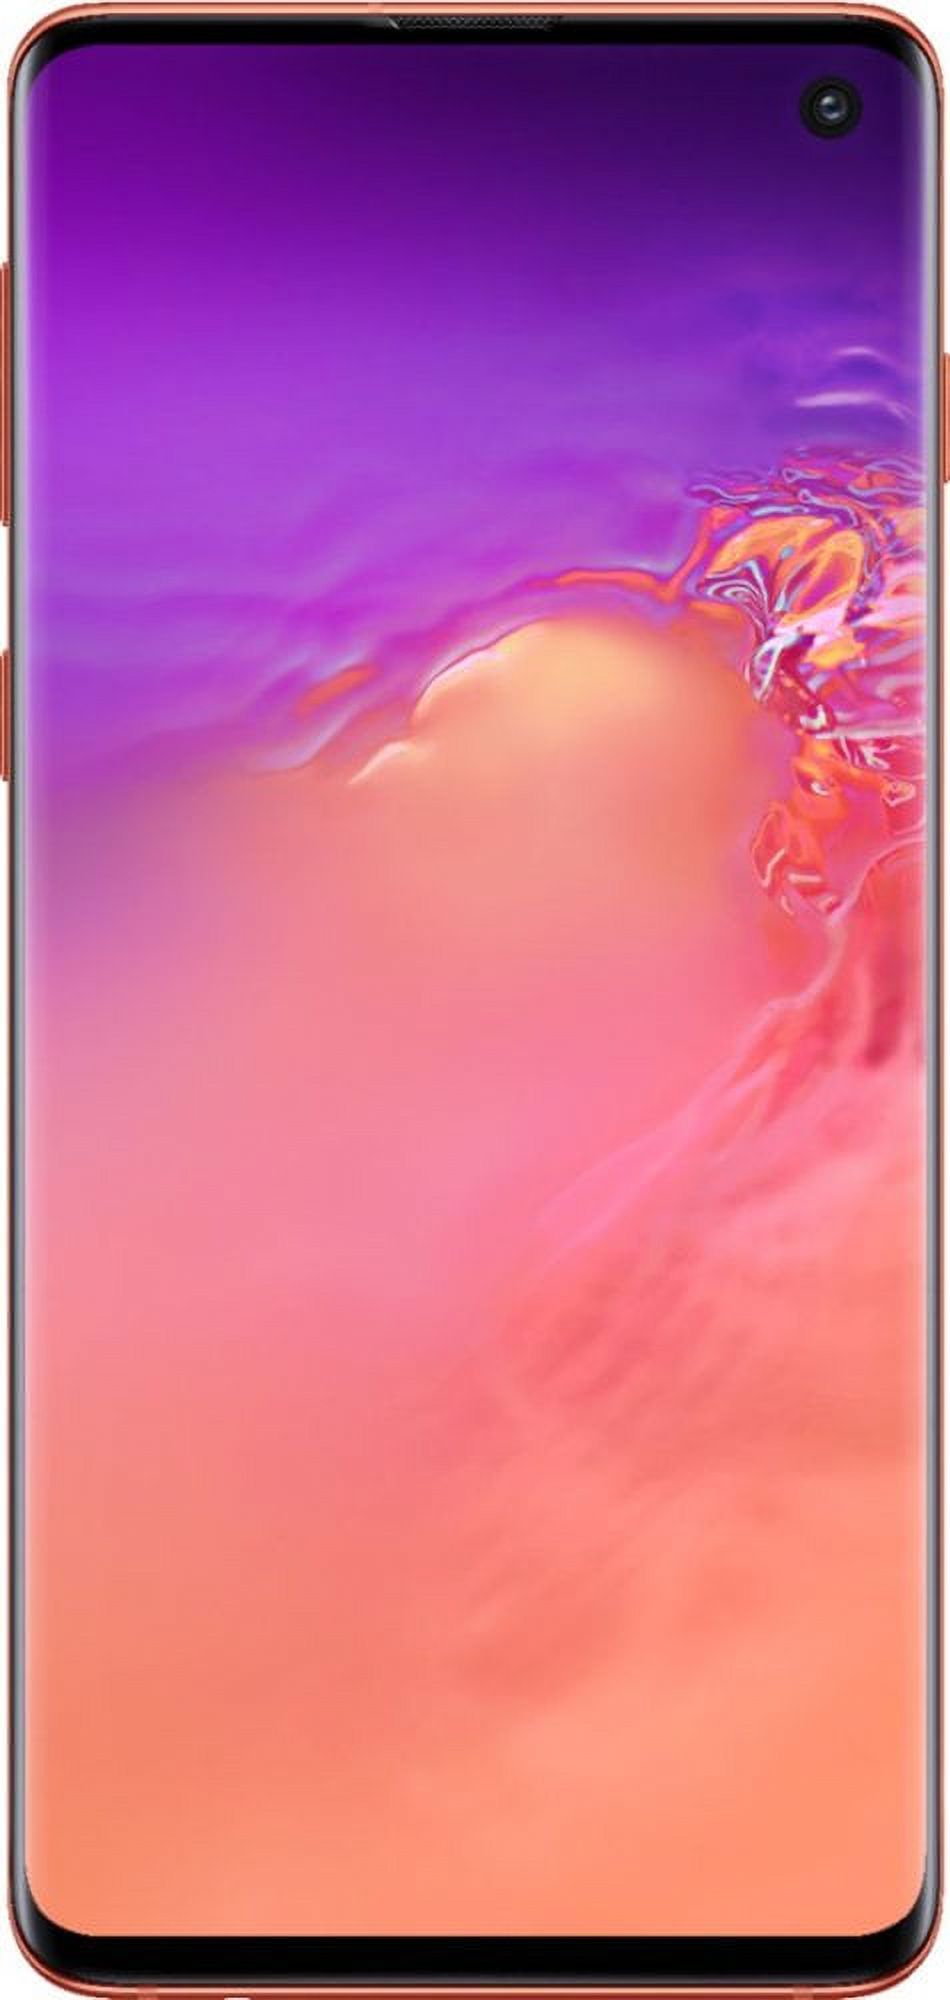 Pre-Owned Samsung GALAXY S10 SM-G973U1 128GB Pink (US Model) - Factory Unlocked Cell Phone (Refurbished: Like New) - image 2 of 6